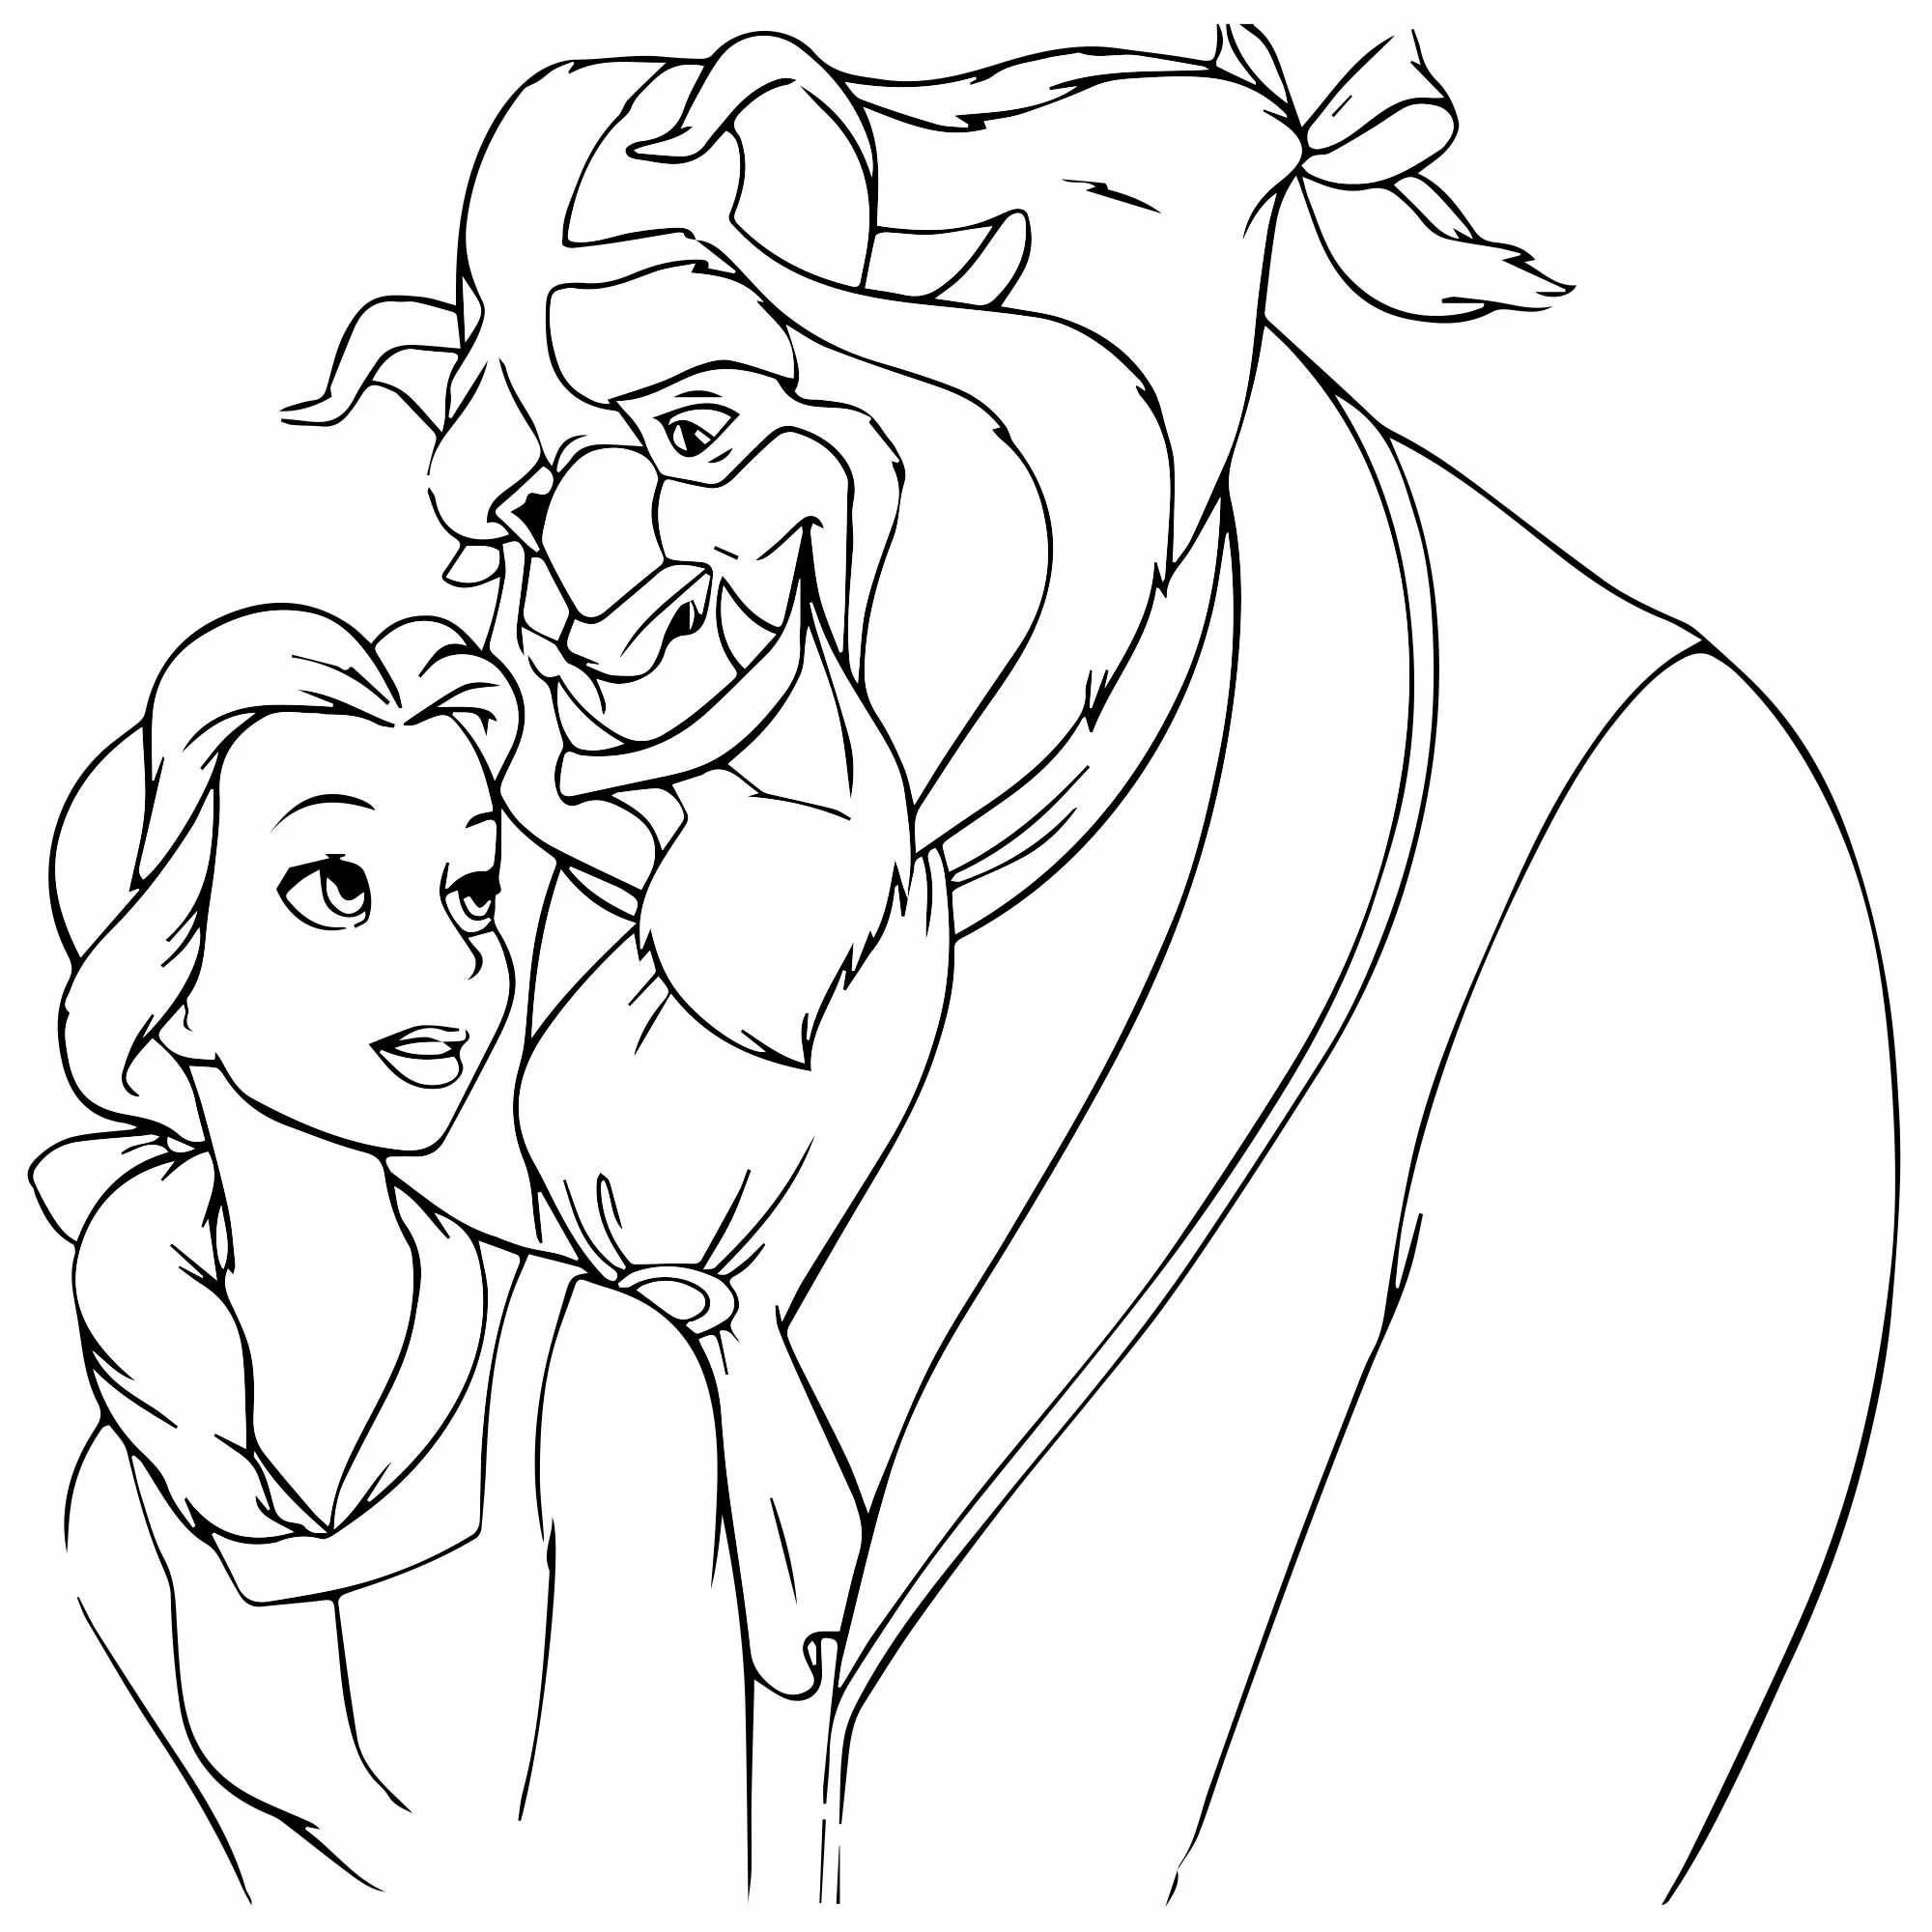 Beauty and the beast for kids #4